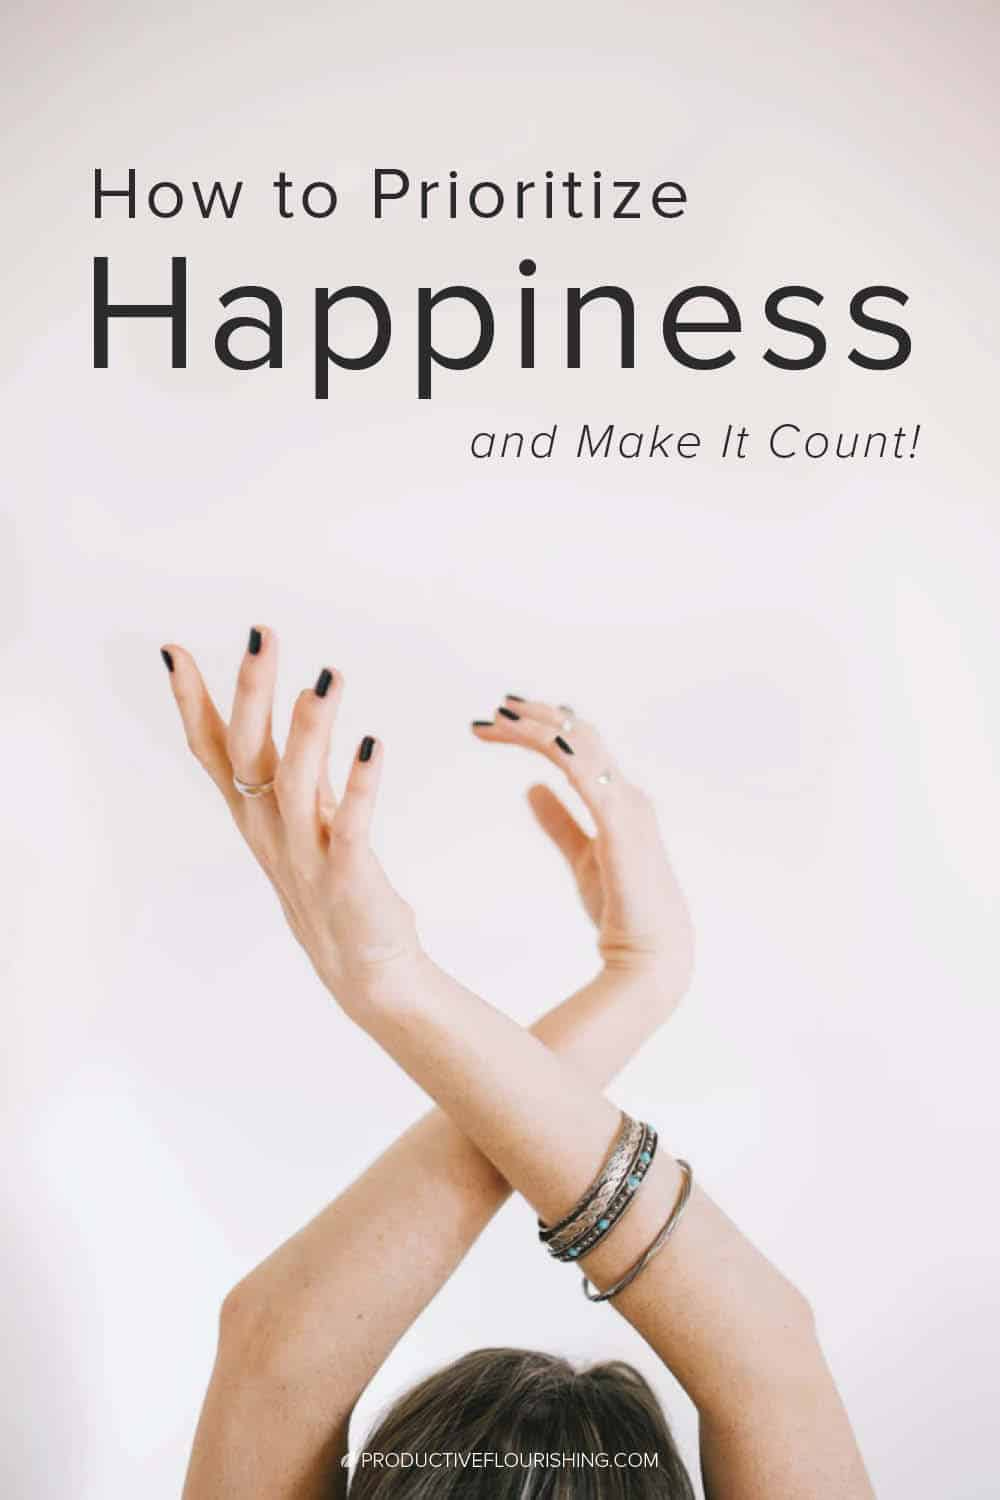 Like most philosophers, I believe that happiness – the flourishing kind, not the ephemeral kind – is the intrinsic value we all want. Read how to prioritize happiness and make it count. #productiveflourishing #selfcare #mindset